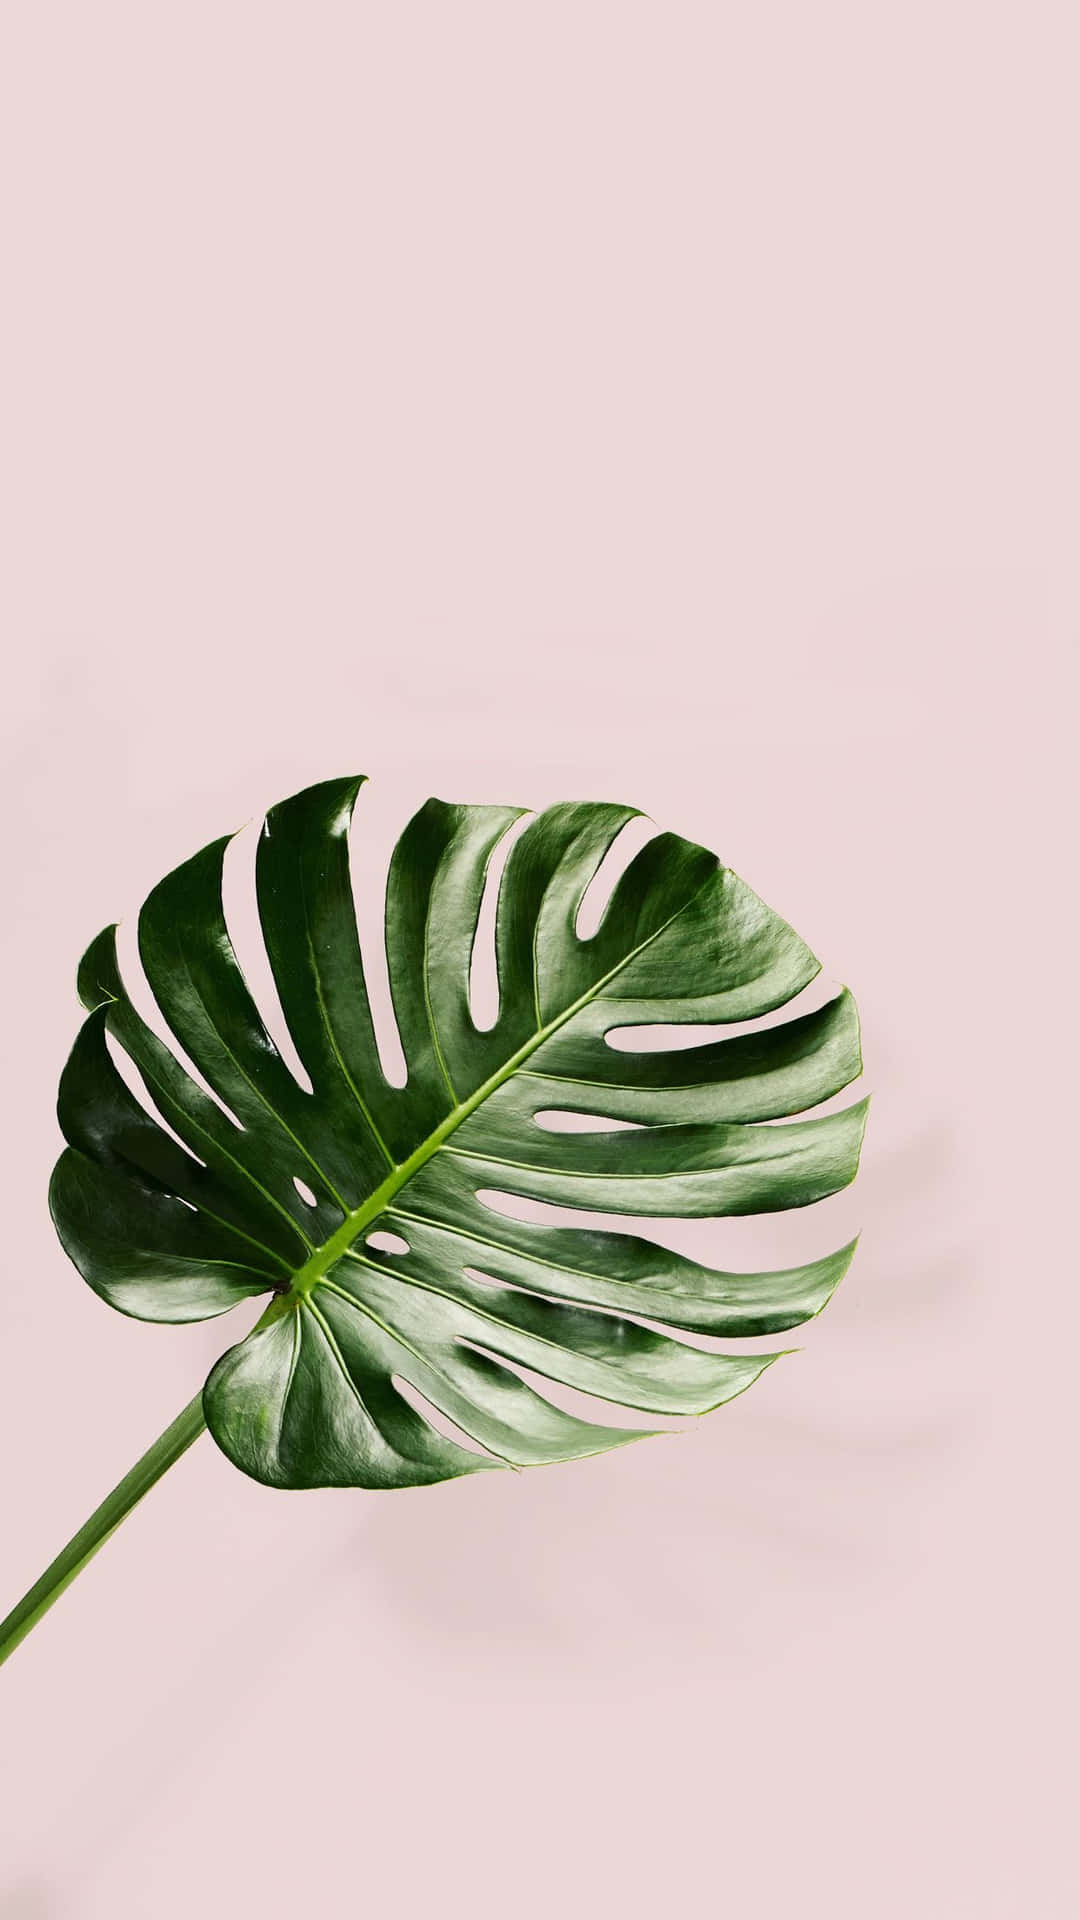 A Large Green Leaf On A Pink Background Wallpaper